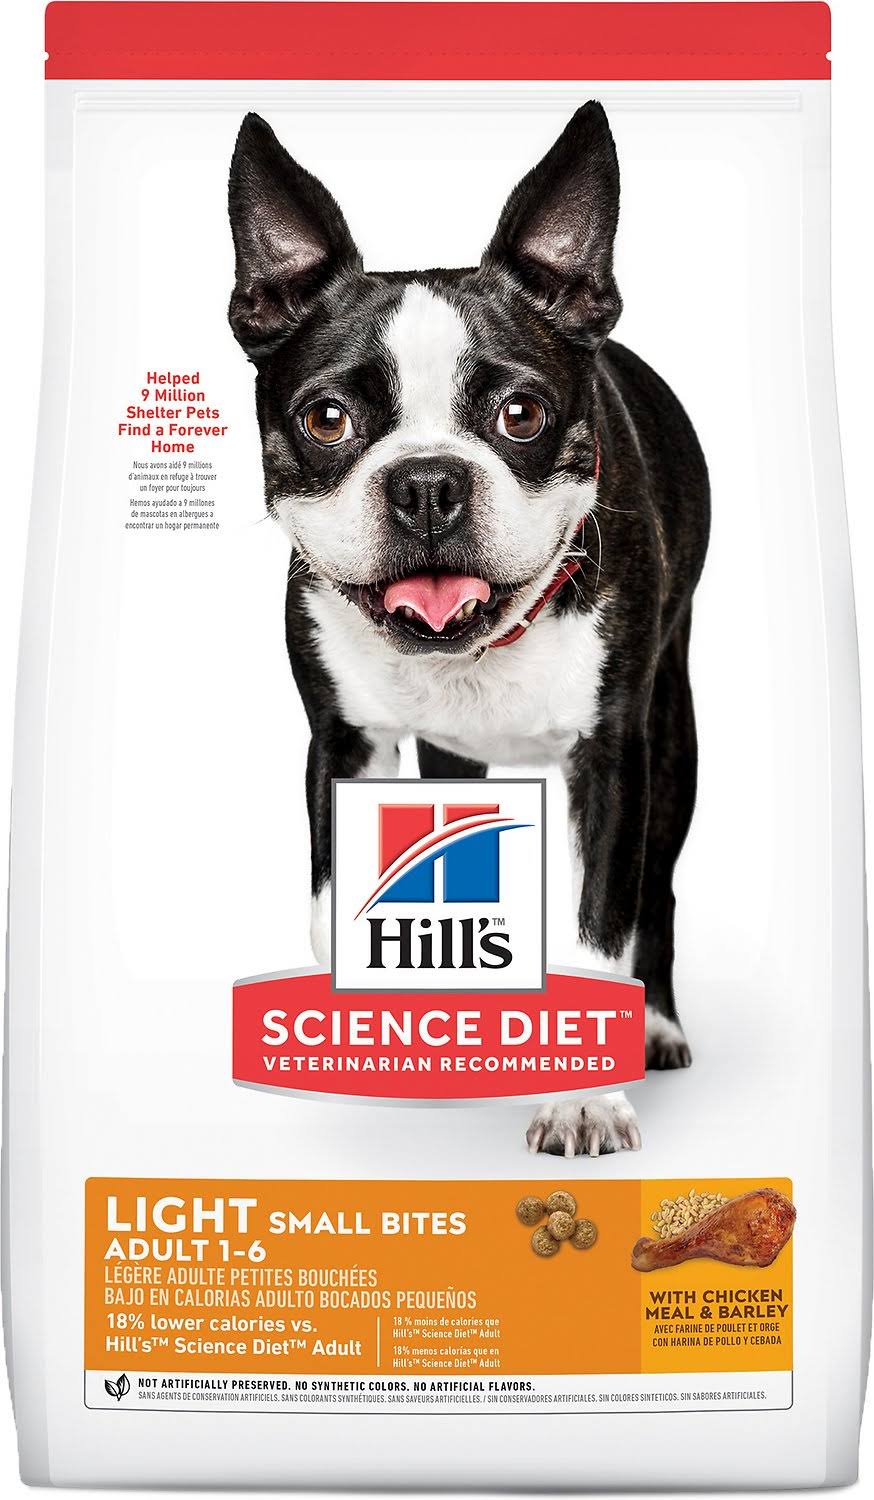 Hill's Science Diet Adult Light Small Bites Chicken Meal and Barley Dry Dog Food - 5lb